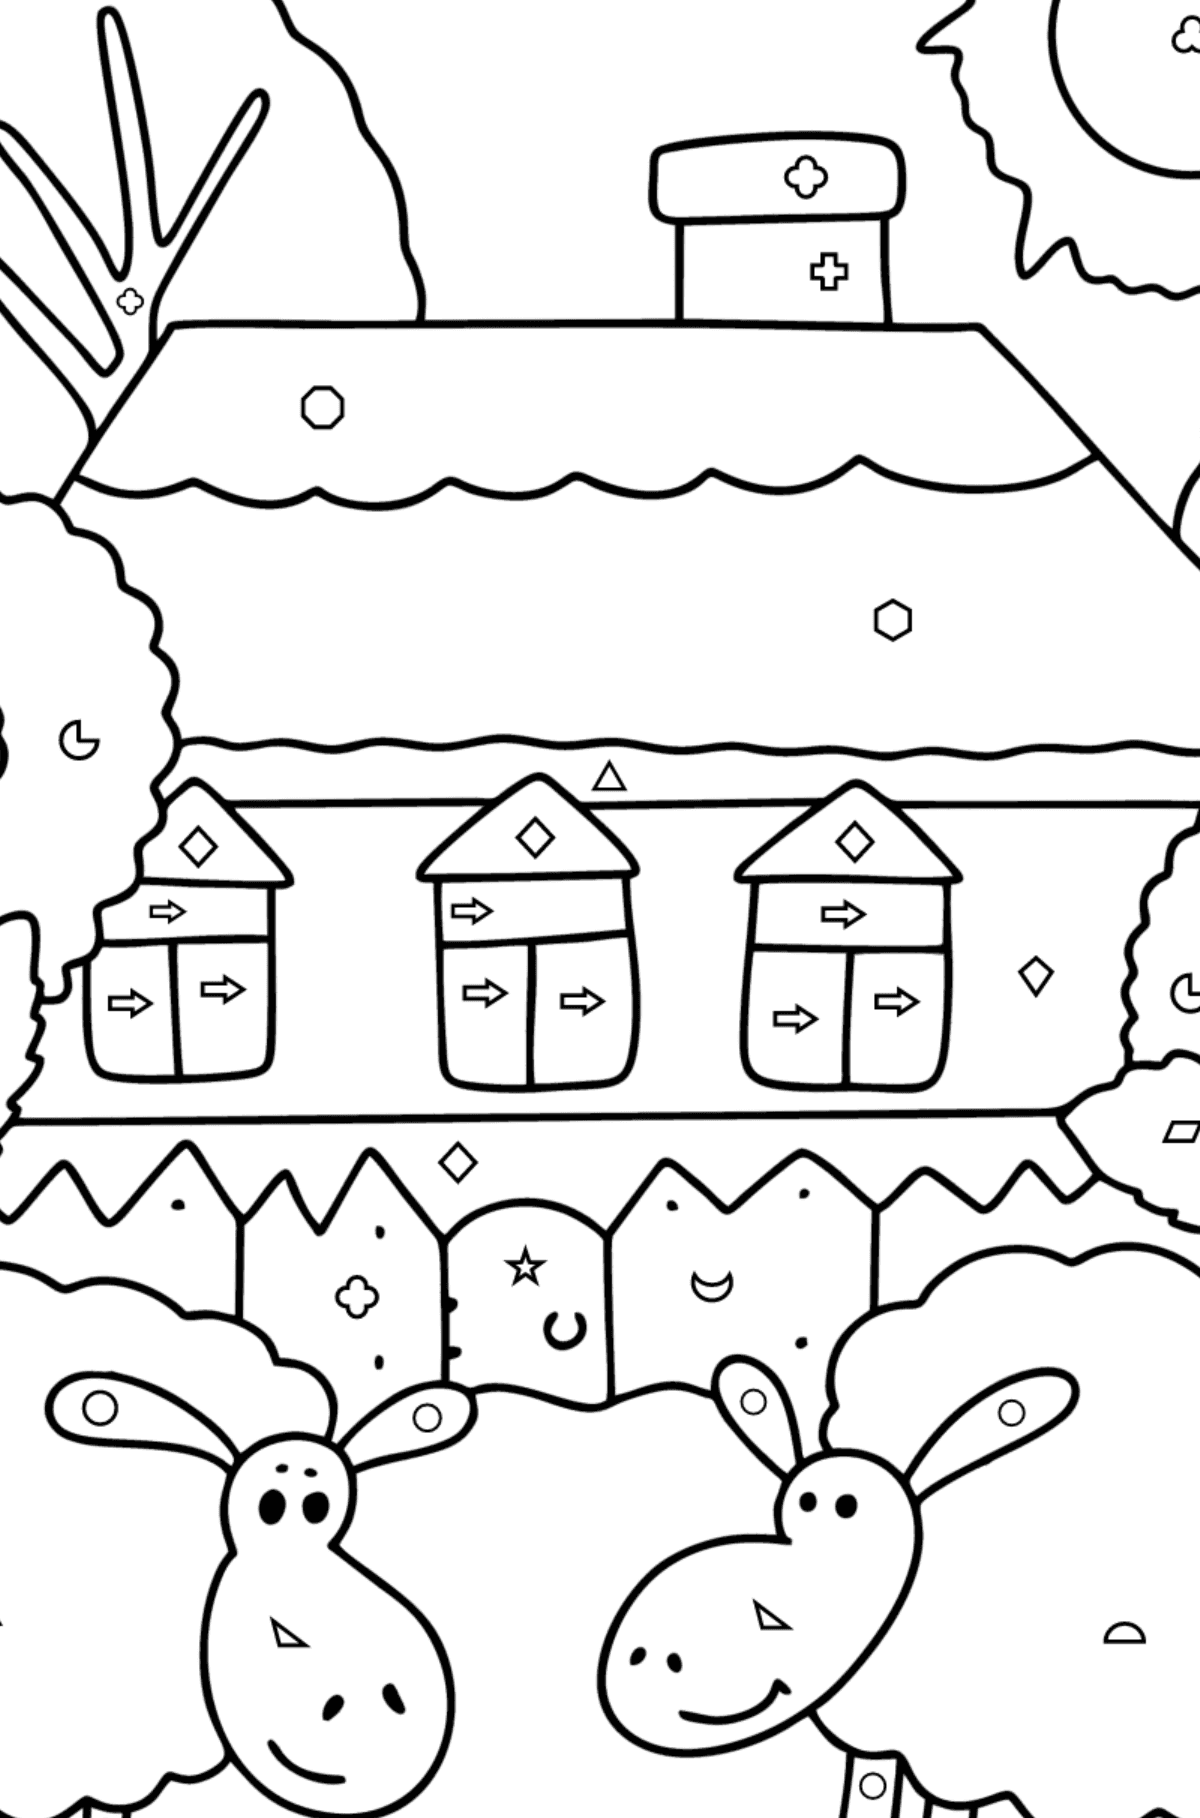 FarmHouse coloring page - Coloring by Geometric Shapes for Kids